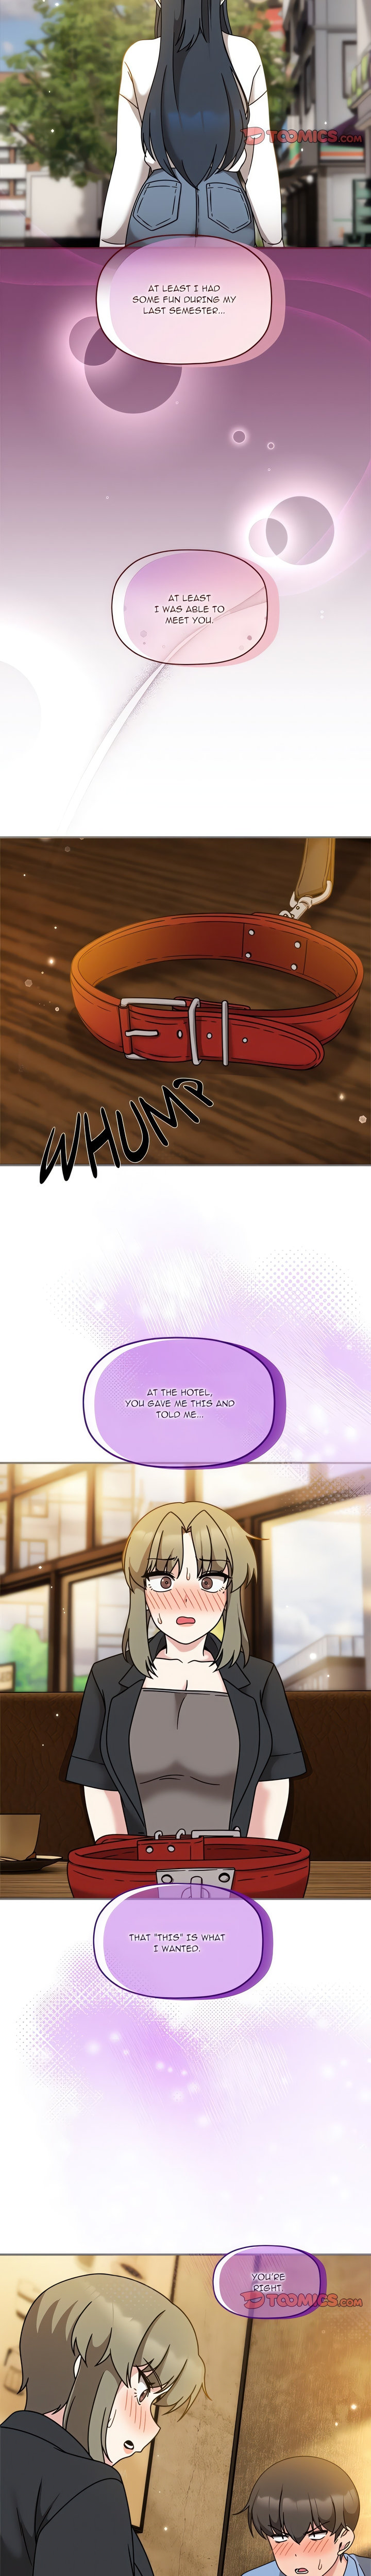 #Follow Me Chapter 58 - Page 18